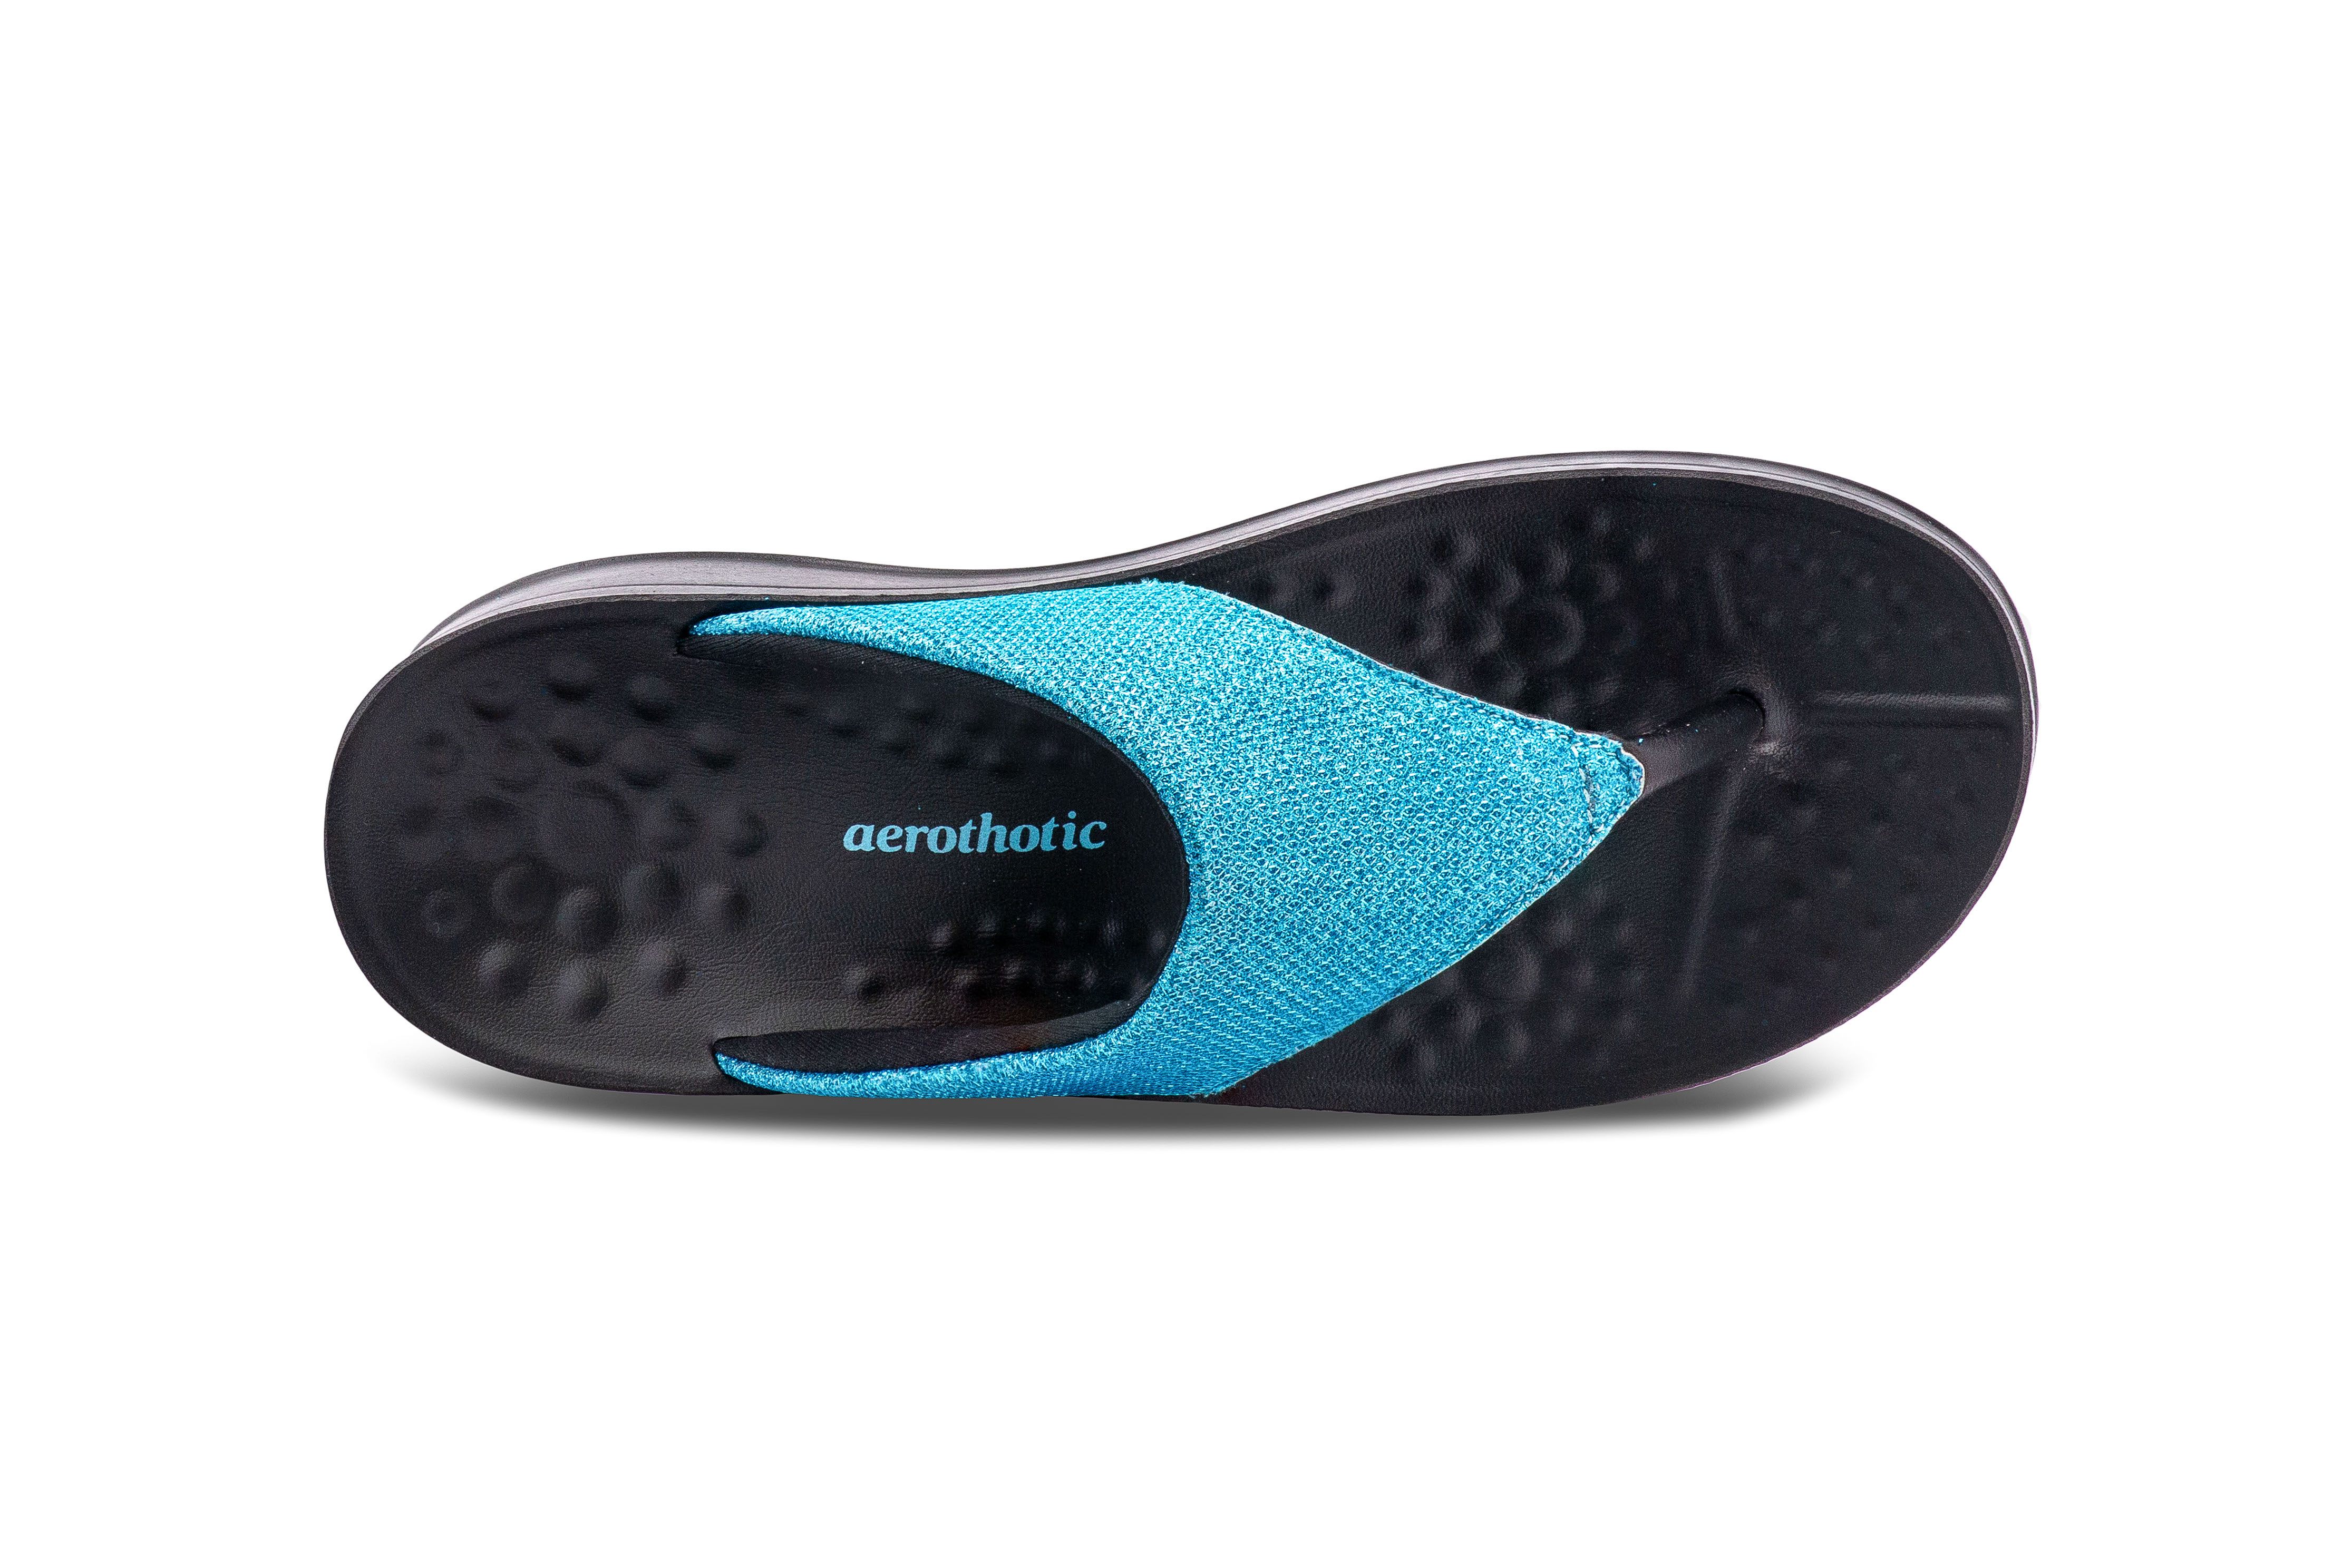 AEROTHOTIC Comfortable Arch Support Orthopedic Flip Flops and Sandals ...